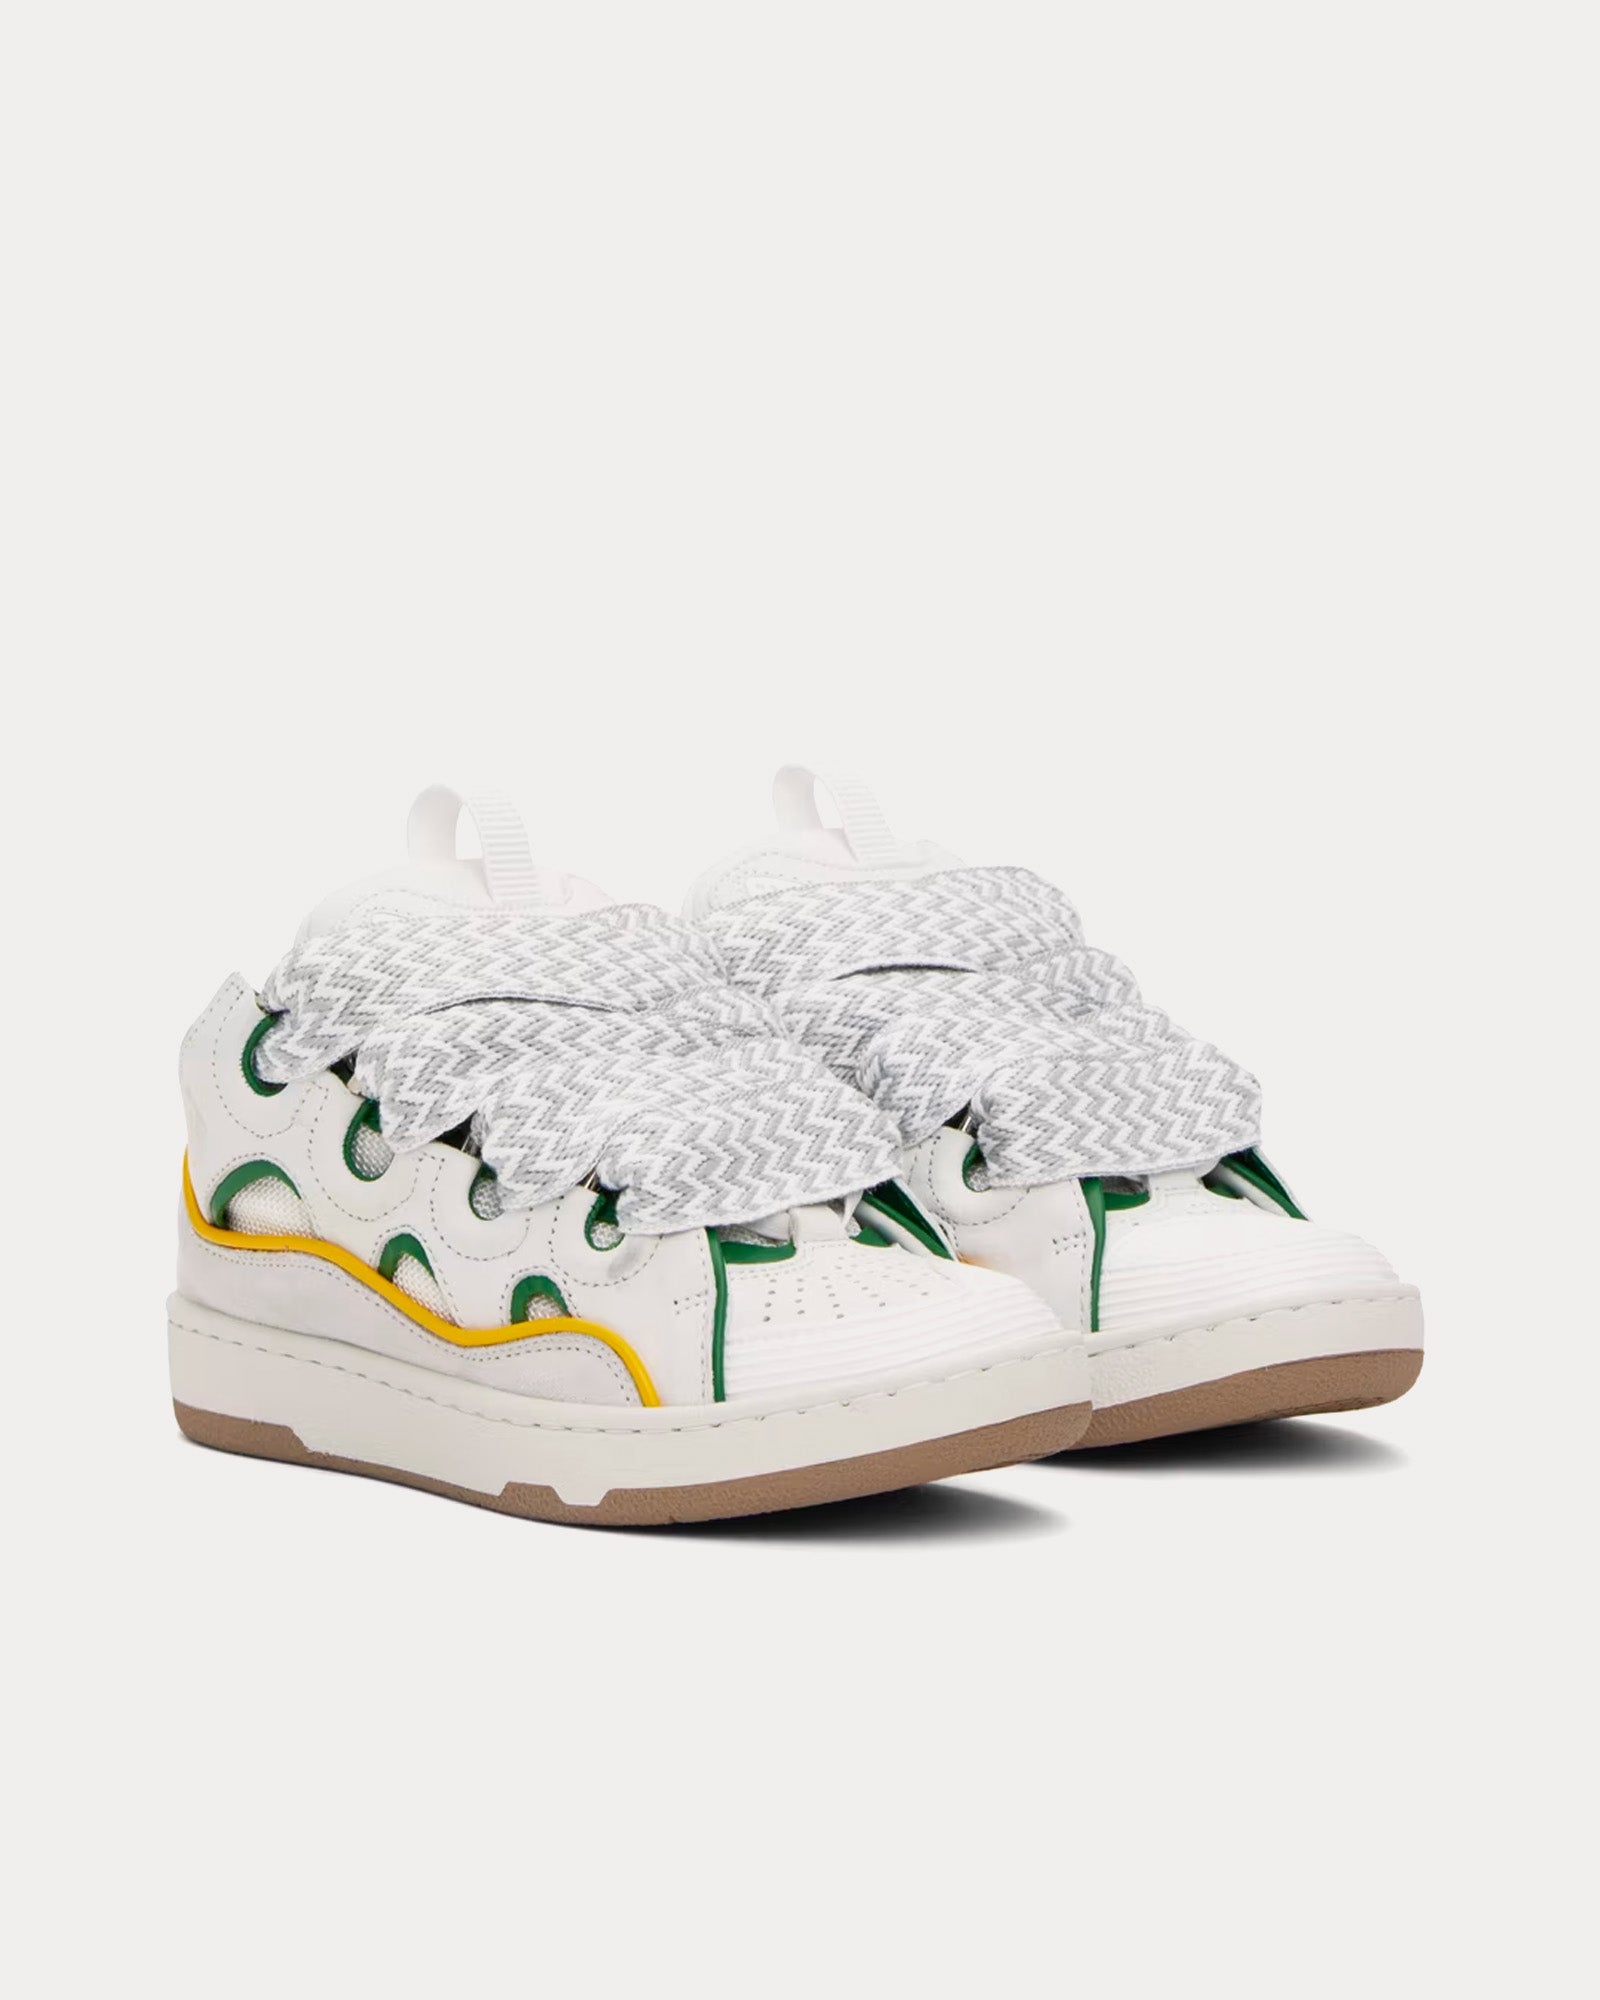 Lanvin - Curb Leather White / Green Low Top Sneakers